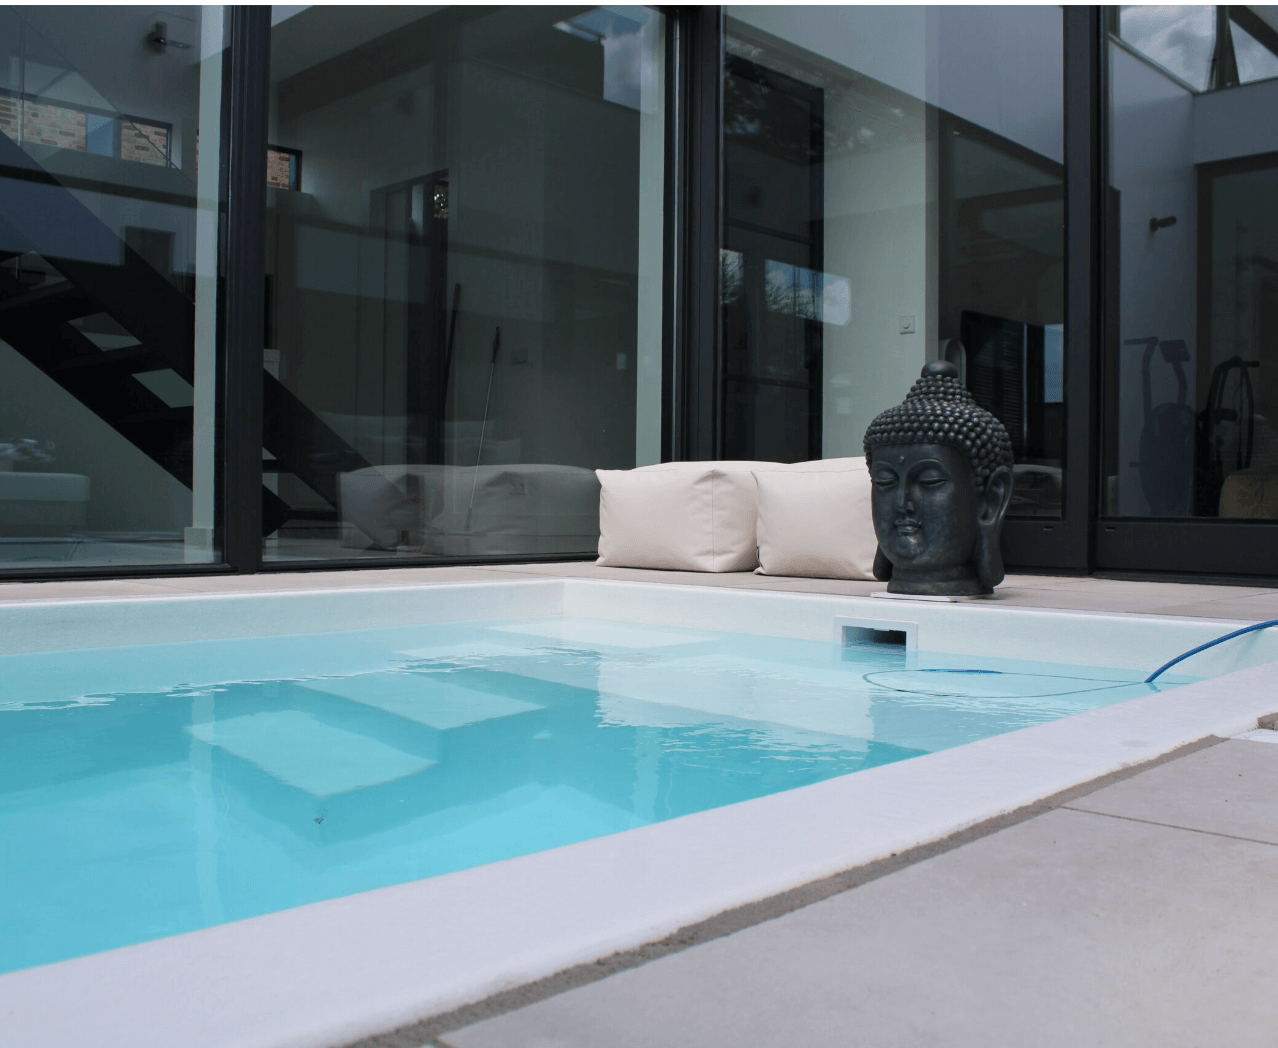 Plunge pool in patio